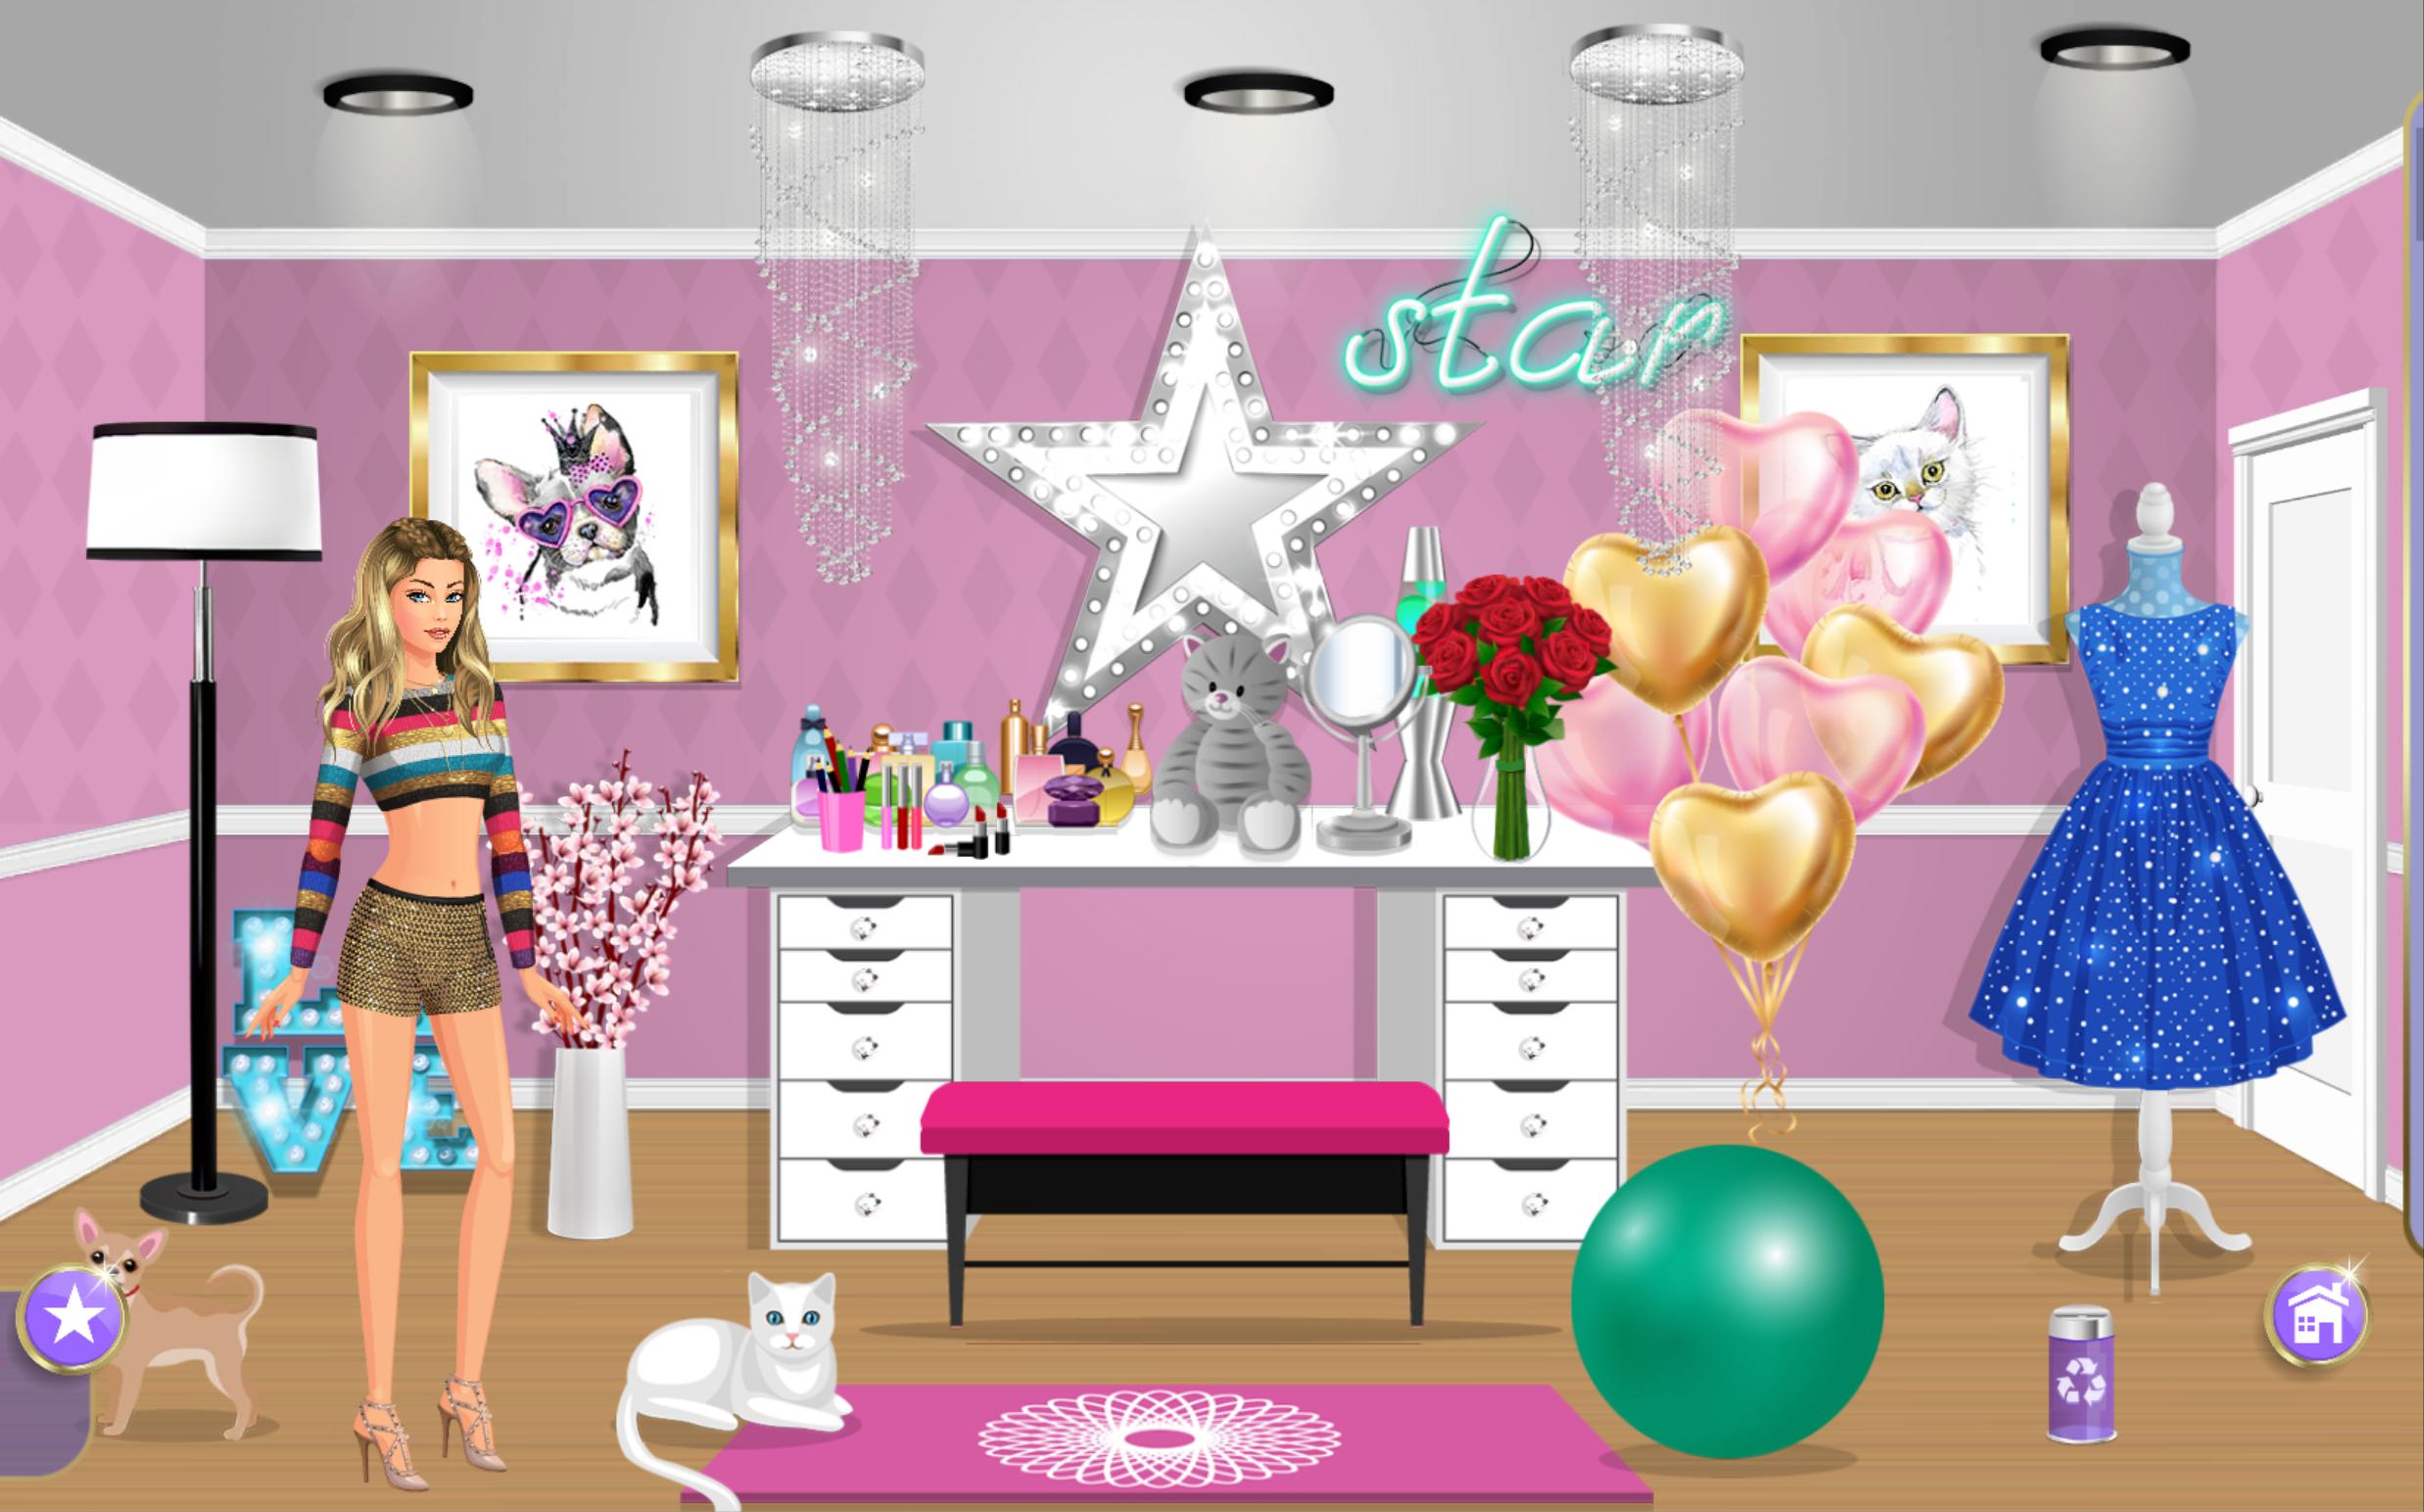 Dress Up Star Girls Dressup And Makeup Games App For - dressing up as a cute roblox girl